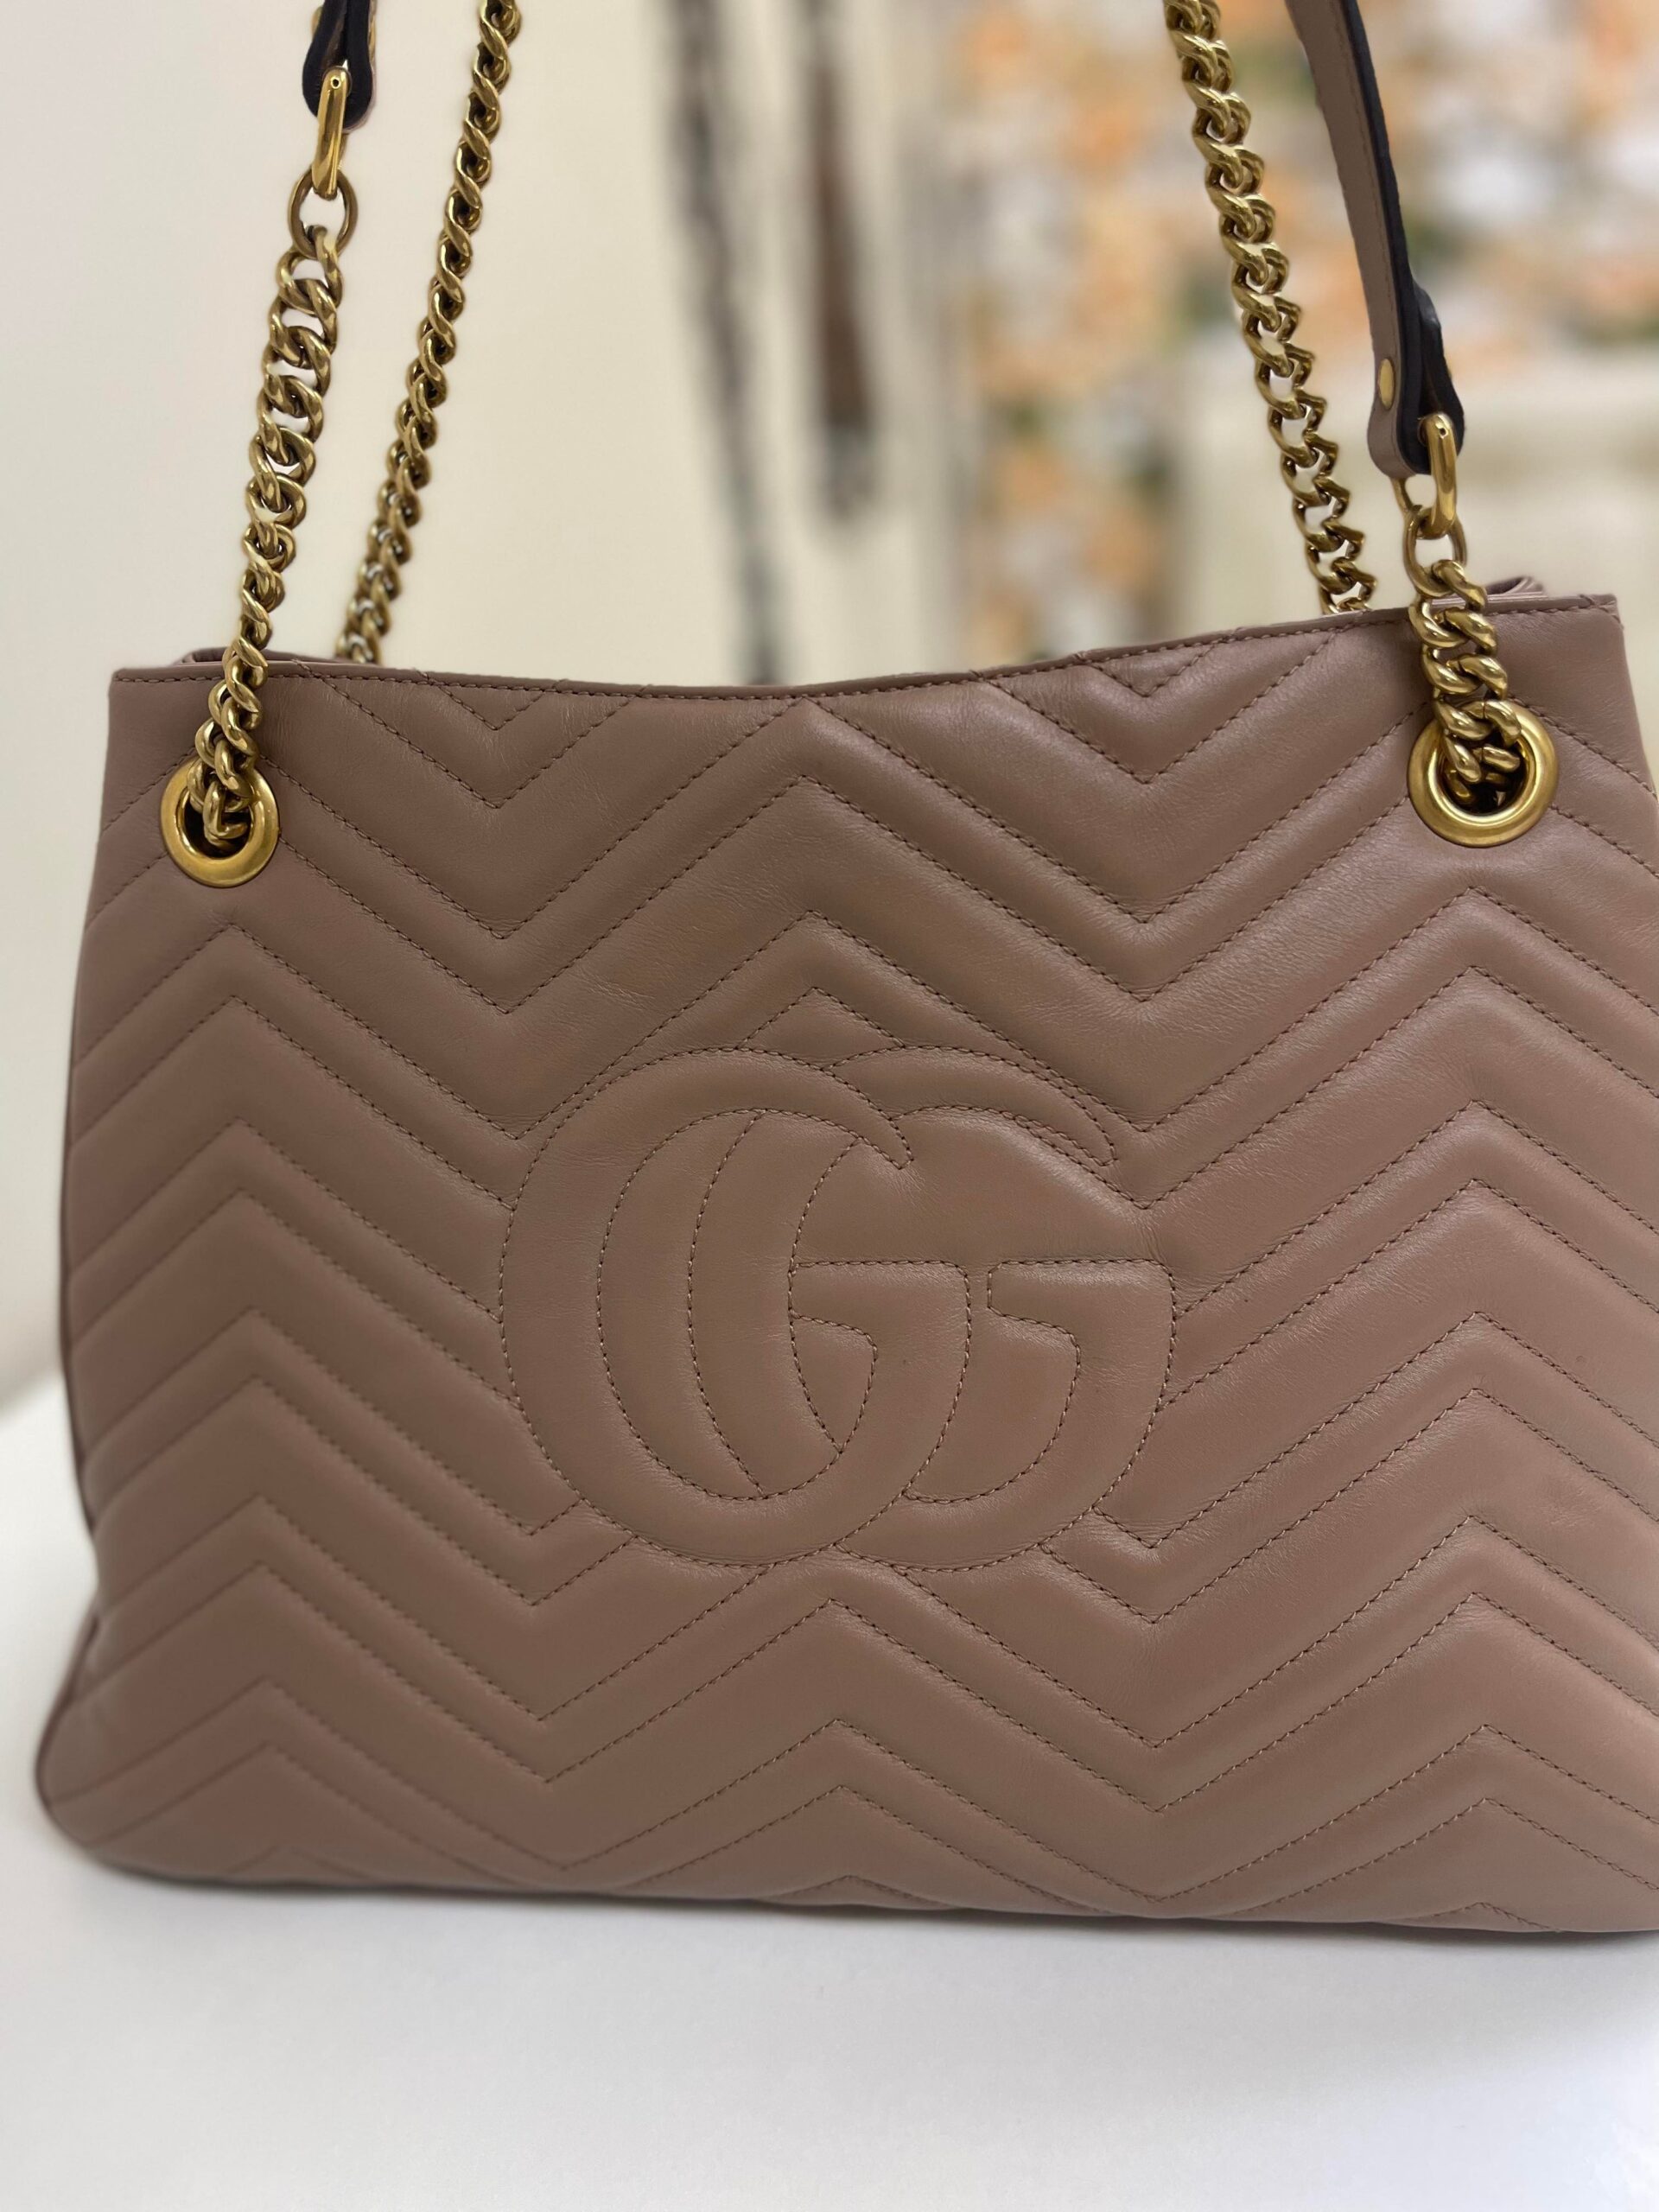 Review! Gucci GG Marmont Matelasse Shoulder Bag Size Small Nude